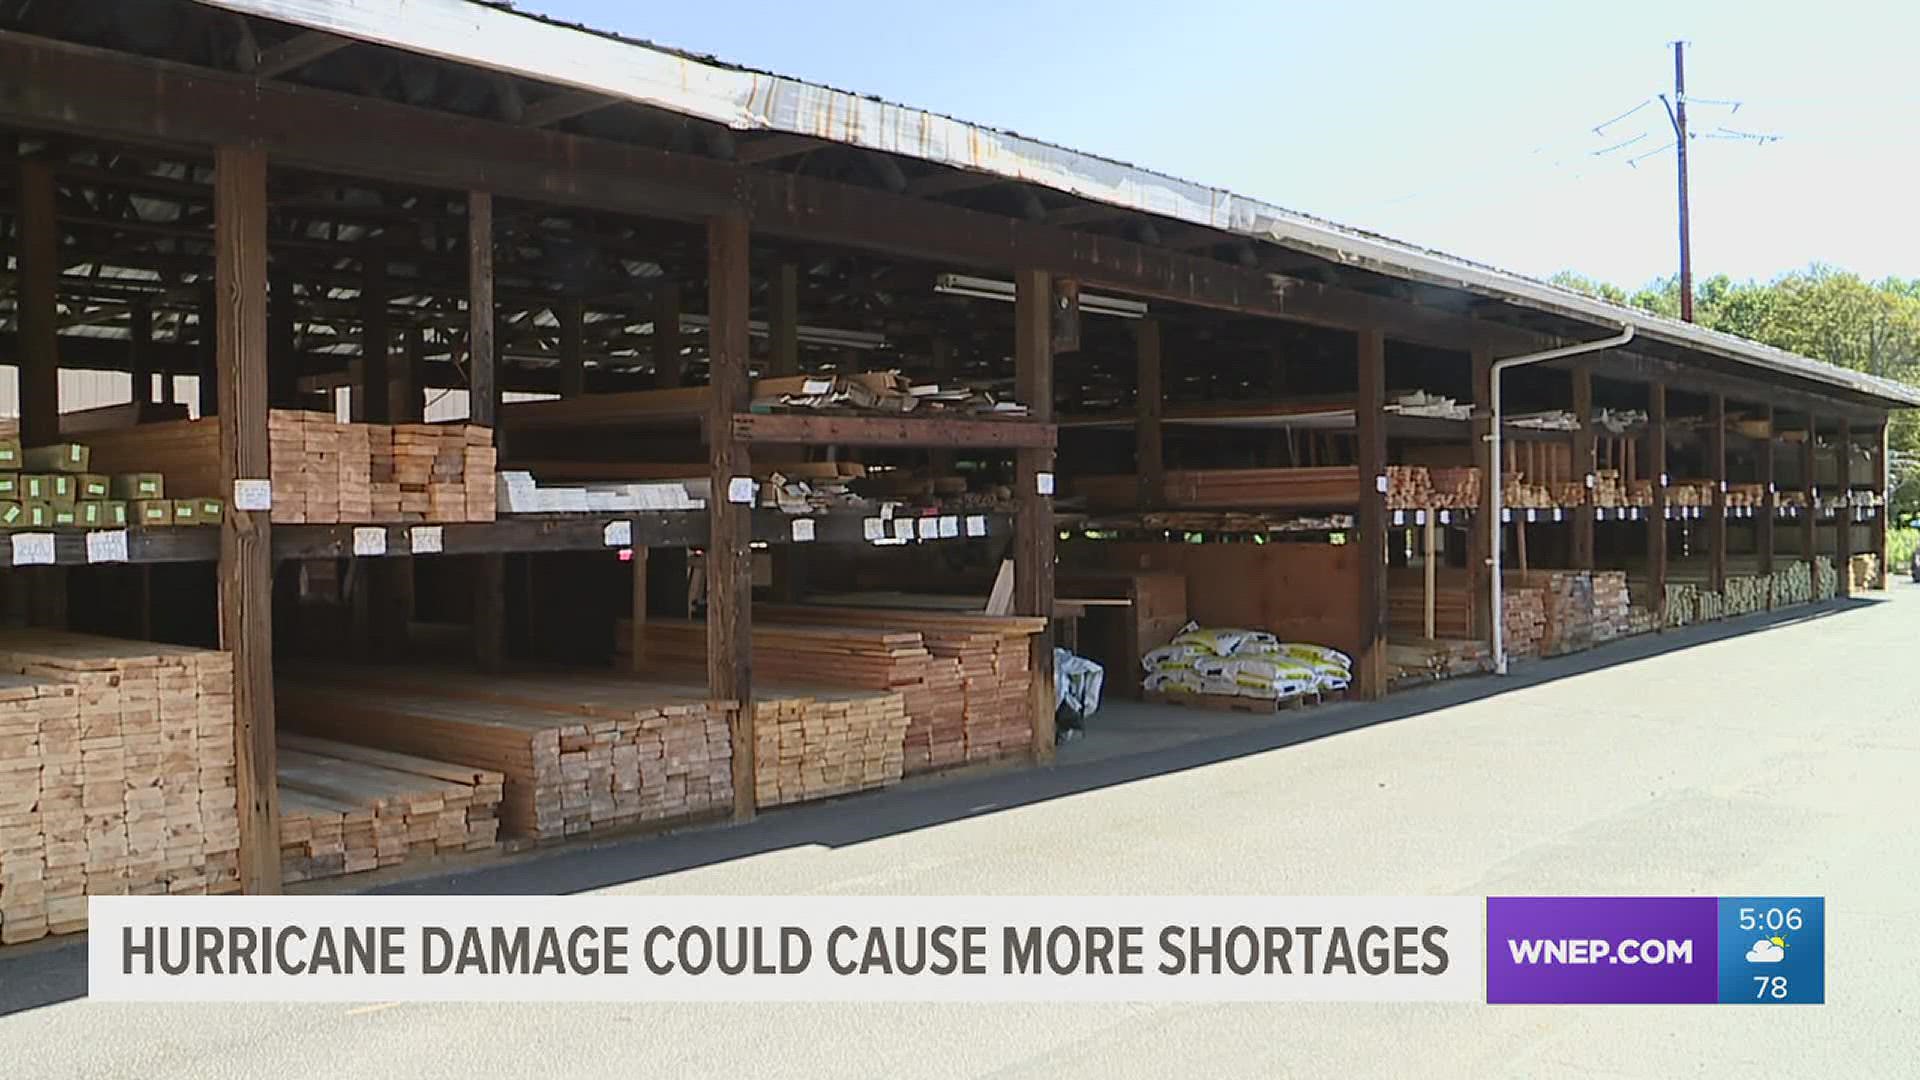 Industries that have already been dealing with shortages could see the issue get worse. Damage from Hurricane Ida is threatening to disrupt certain supply chains.